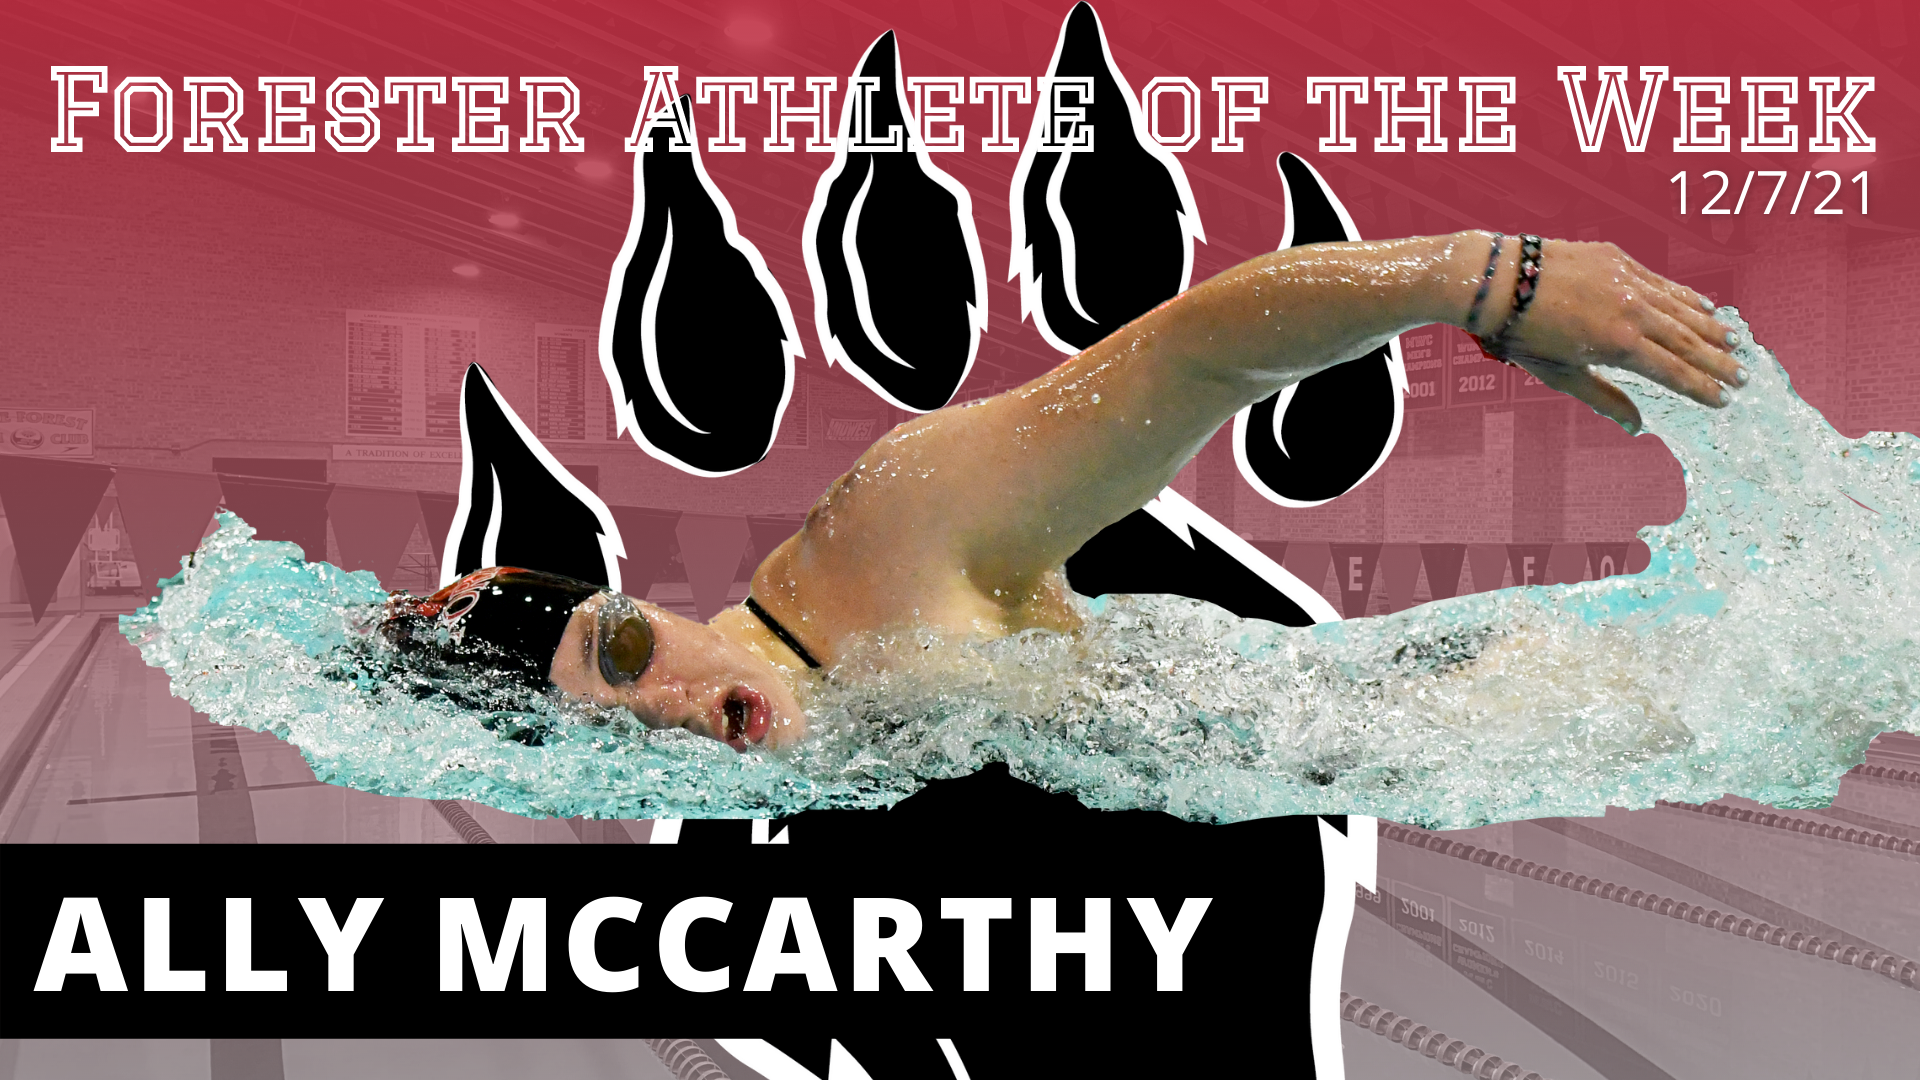 Ally McCarthy Named Women's Forester Athlete of the Week